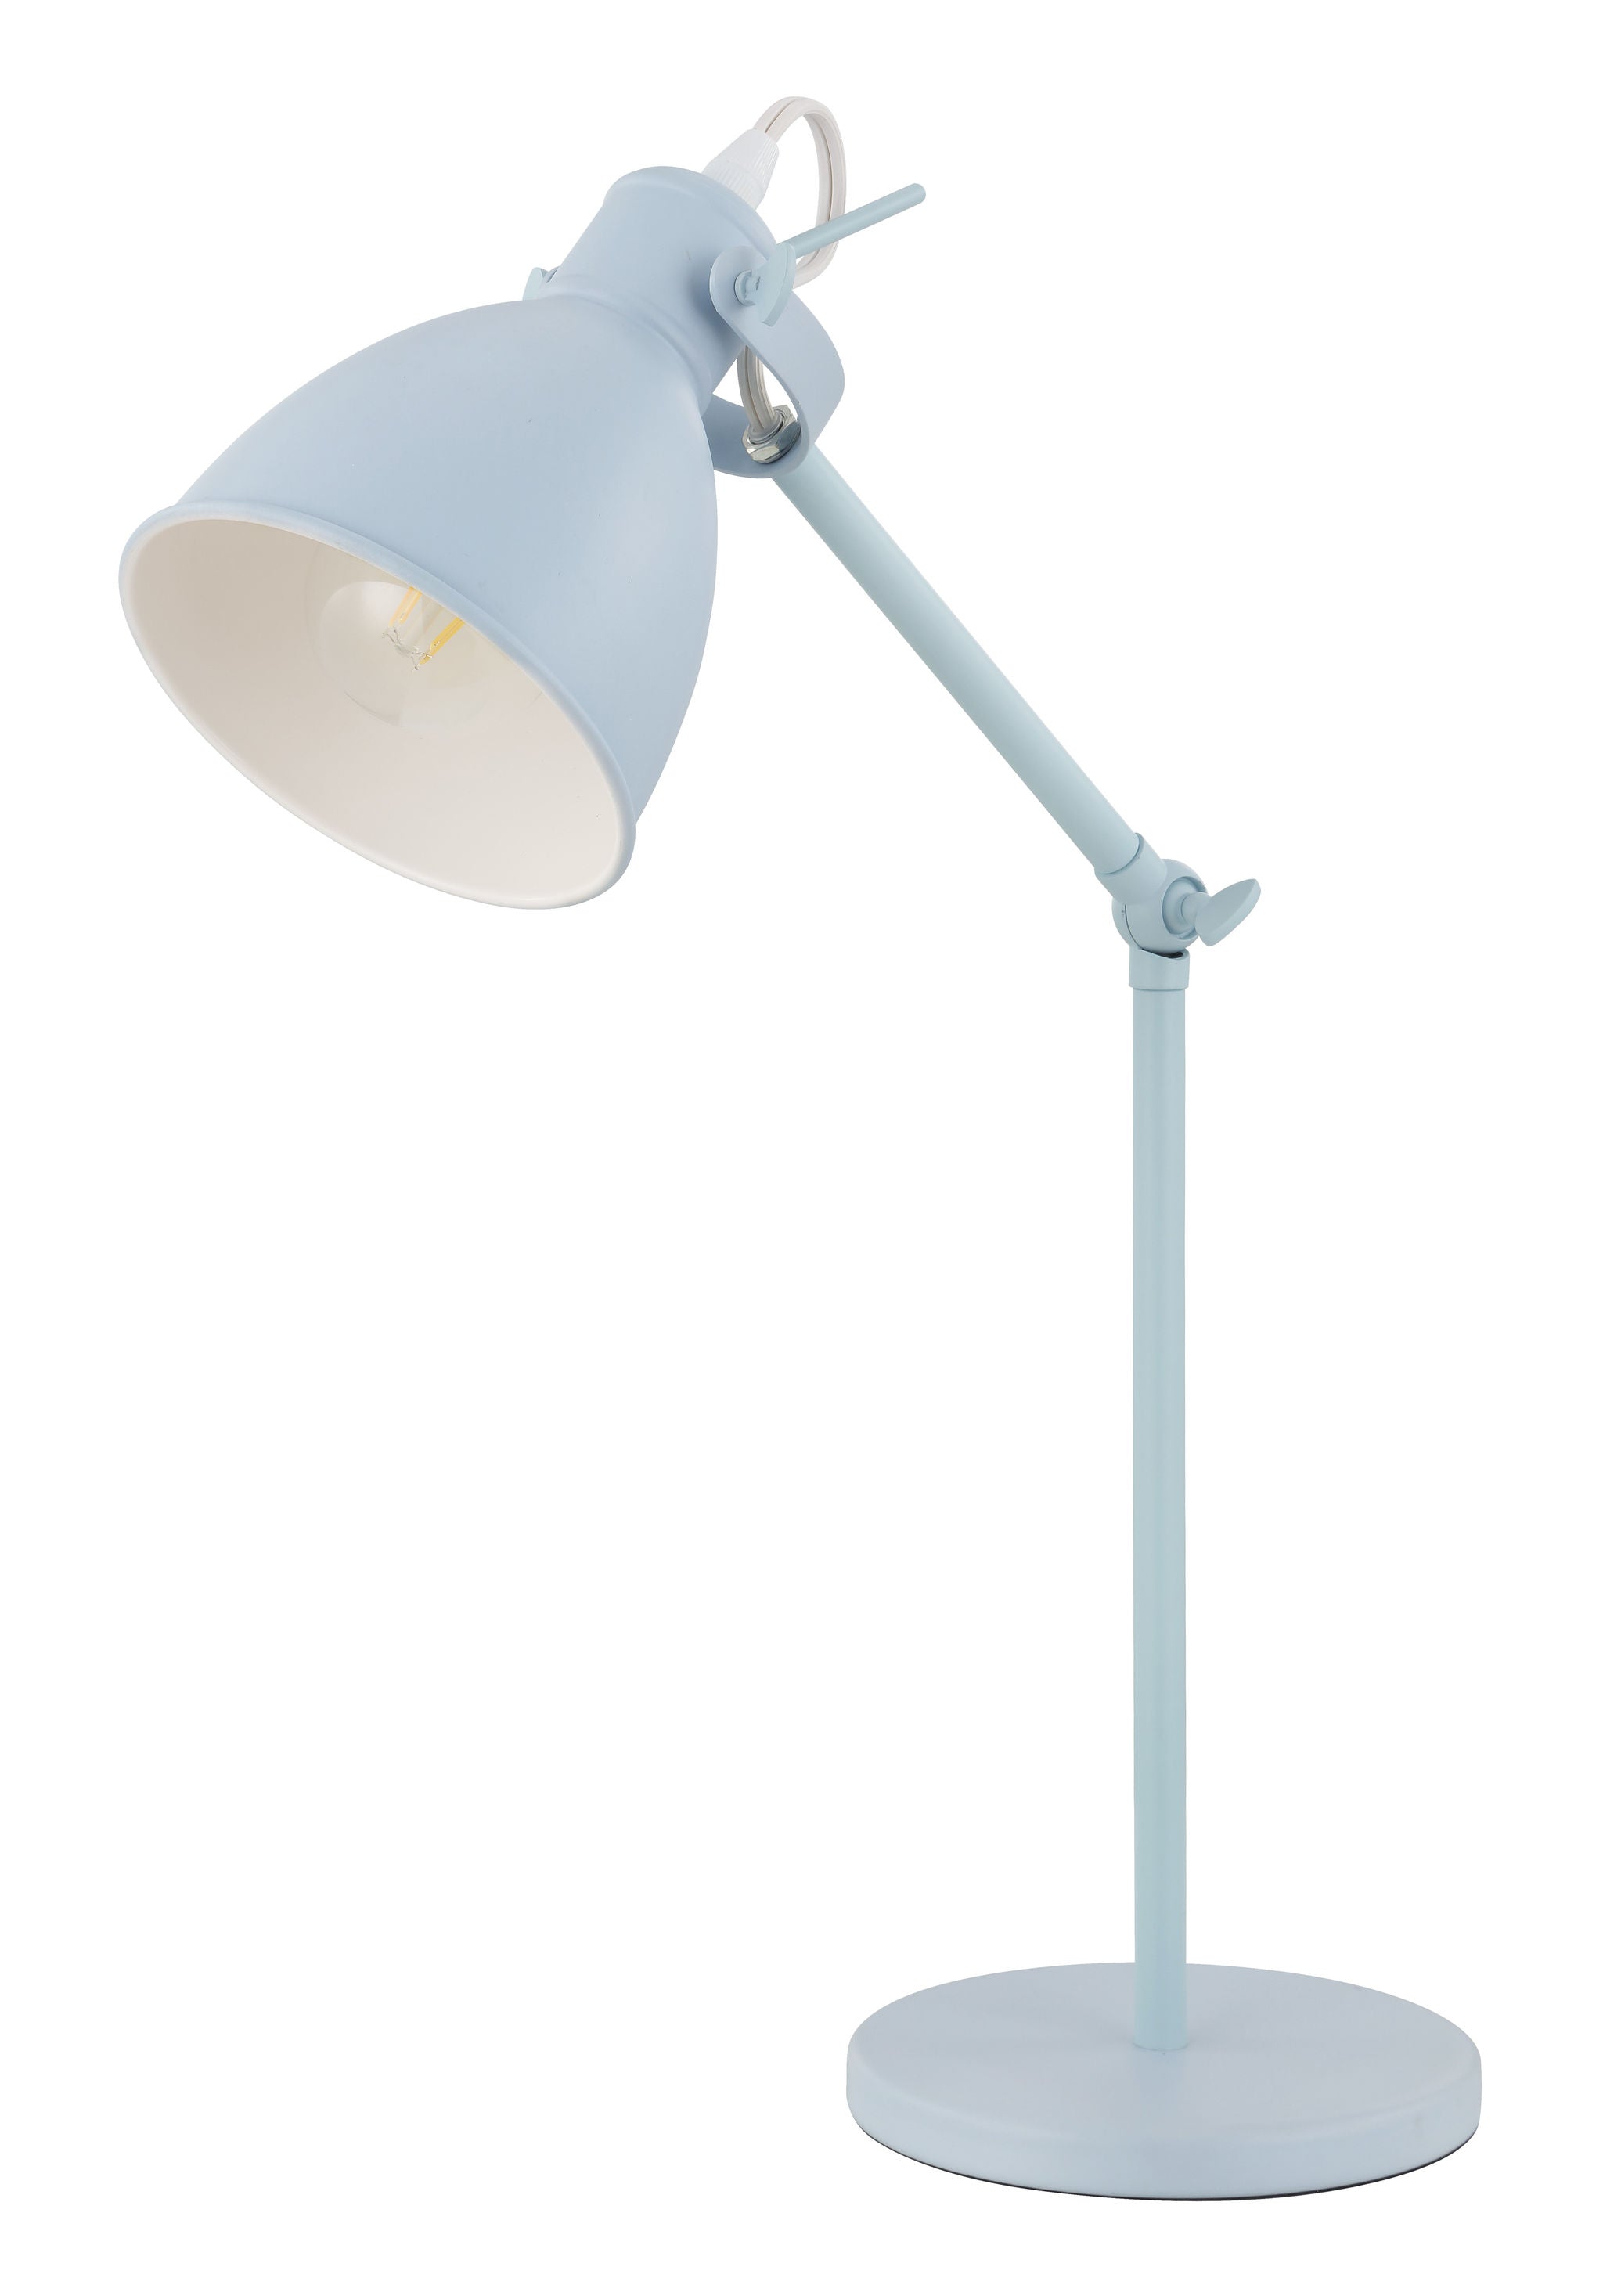 Priddy-P Table lamp - 204085A | EGLO